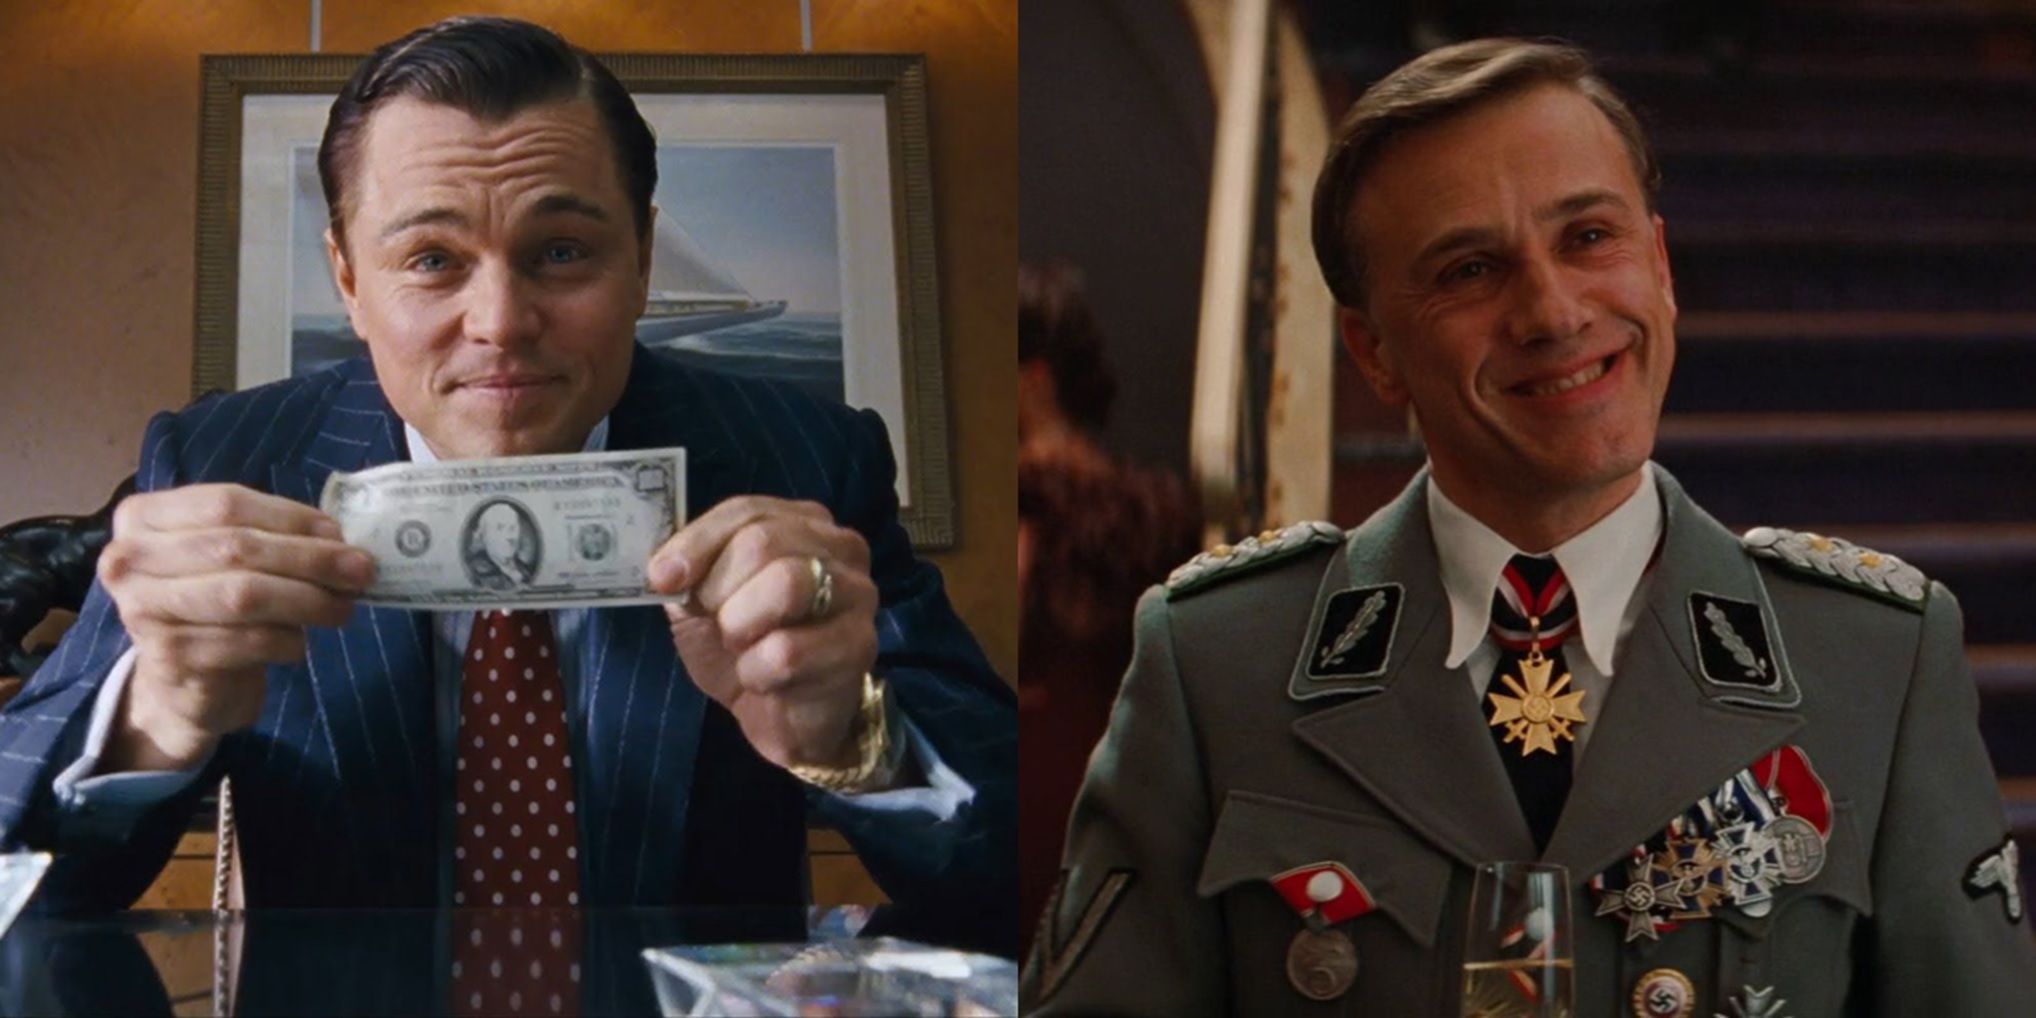 Split image of Leonardo DiCaprio in The Wolf of Wall Street and Christoph Waltz in Inglourious Basterds